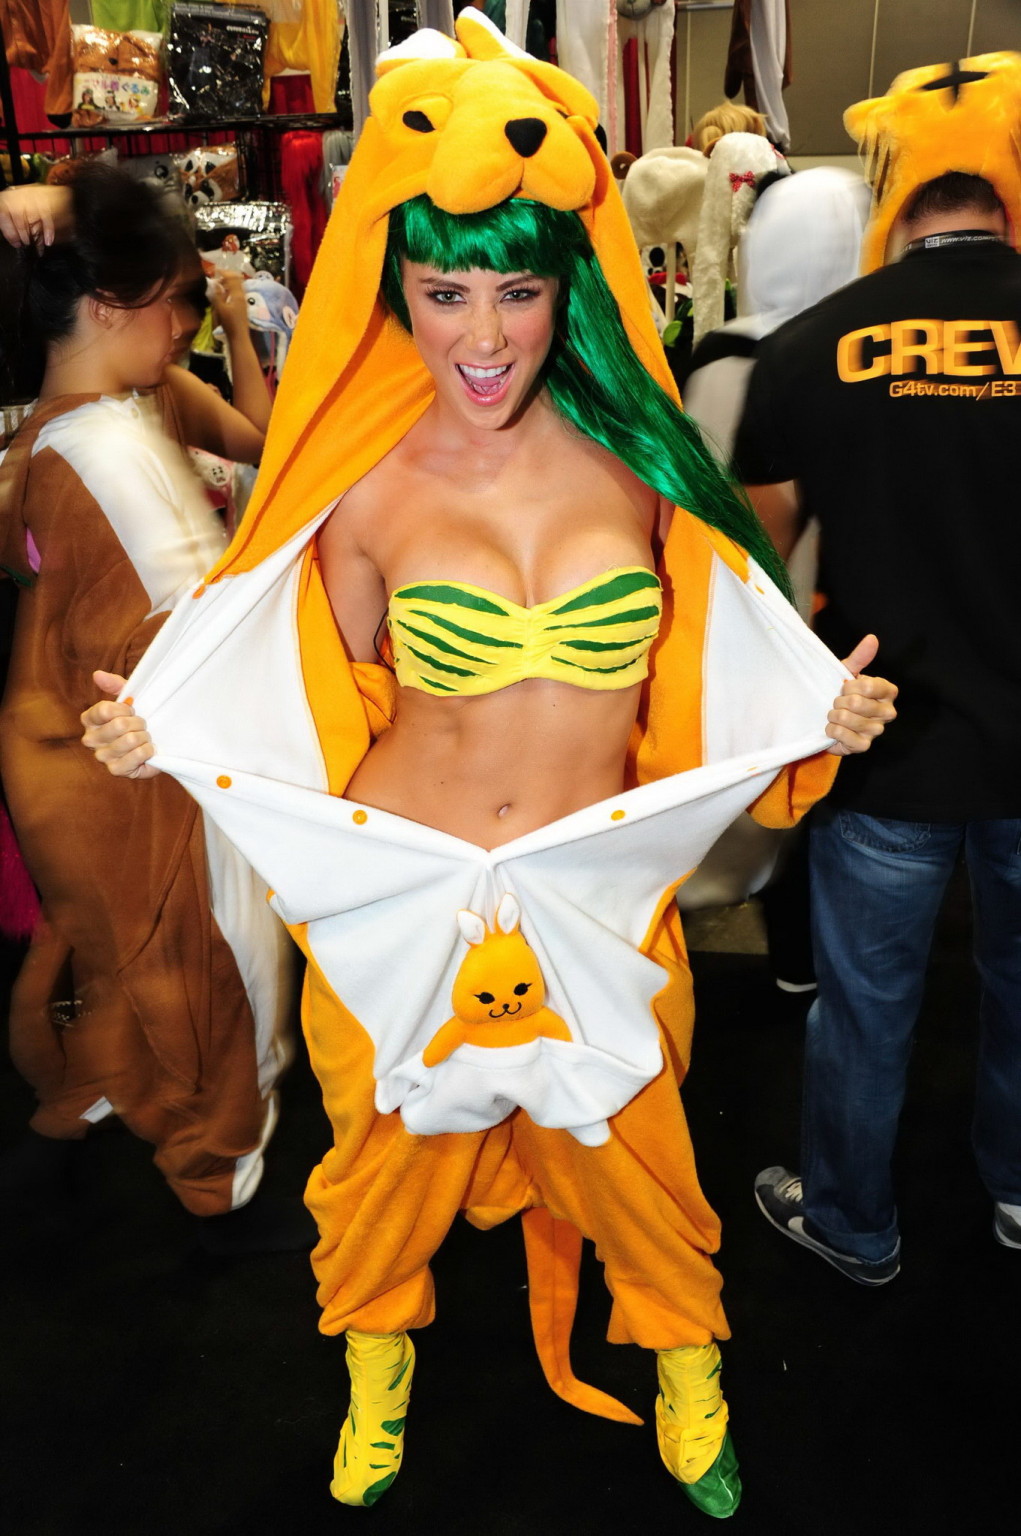 Sara Jean Underwood wearing skipy outfit at the Anime Expo in LA #75290210